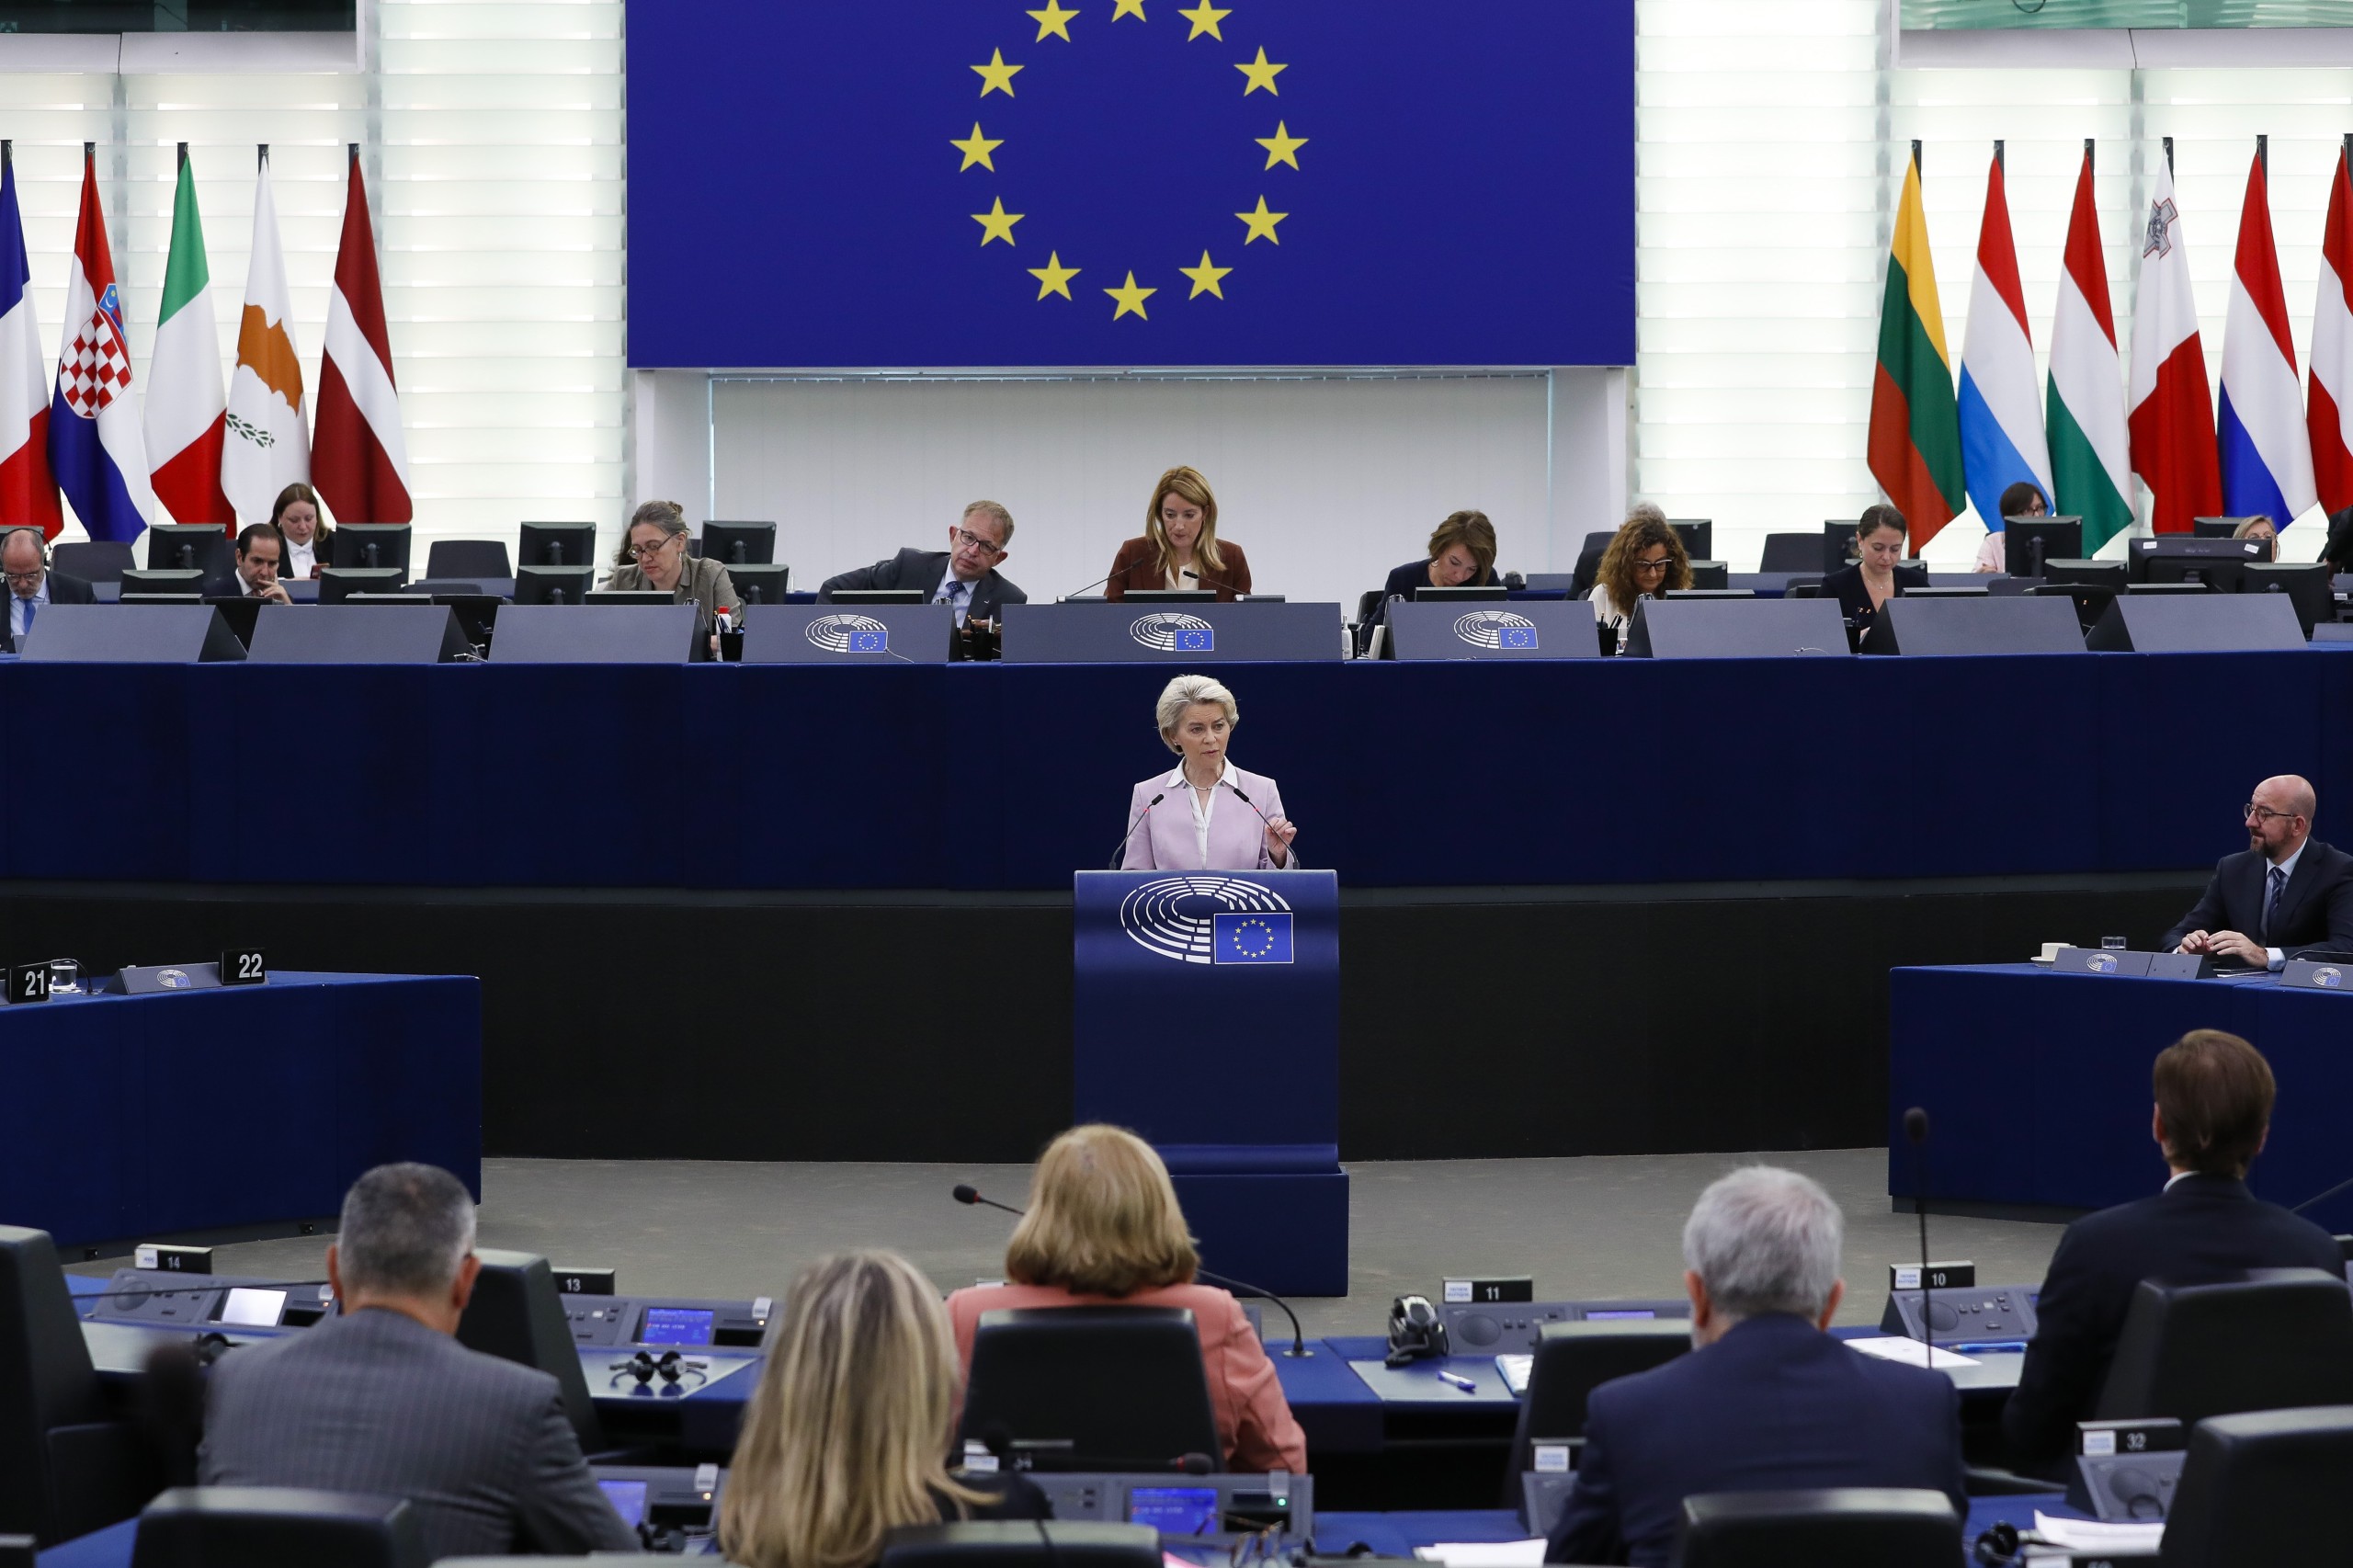 epa10001503 European Commission President Ursula von der Leyen (C) delivers a speech on the Conclusions of the latest Special European Council meeting of May 2022, at the European Parliament in Strasbourg, France, 08 June 2022.  EPA/JULIEN WARNAND